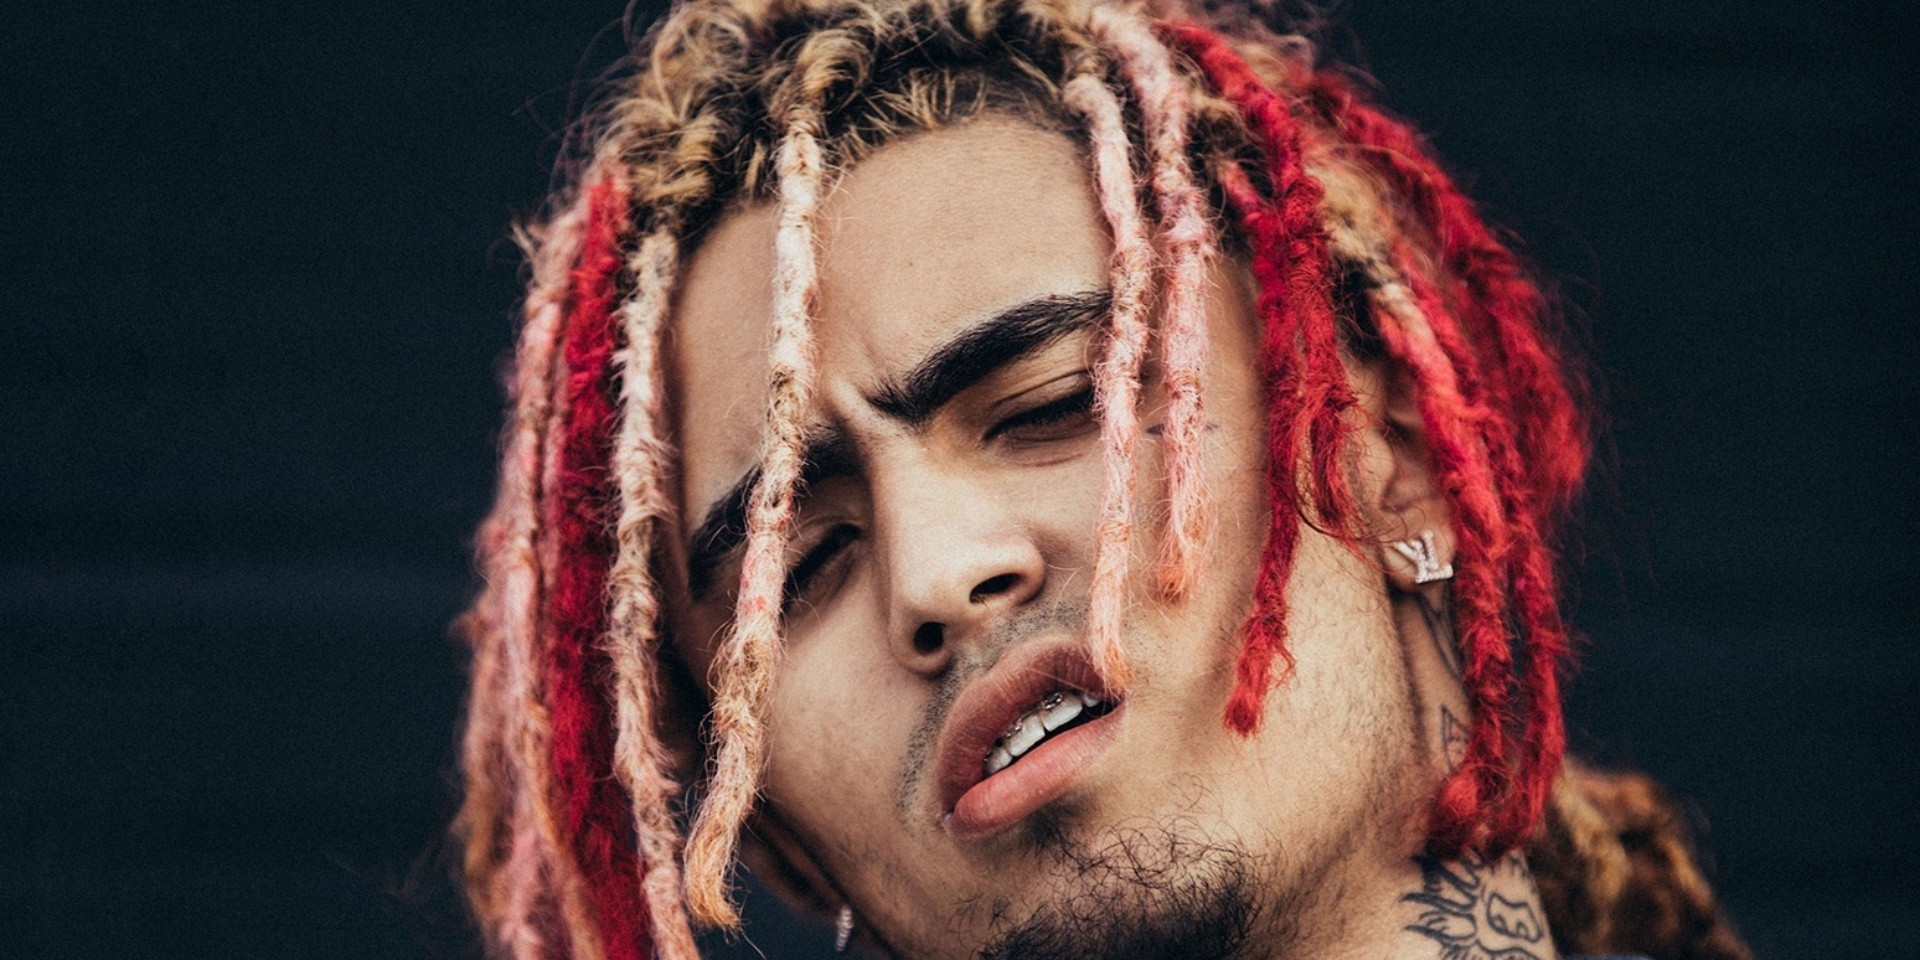 Lil Pump releases anti-Asian song snippet, Internet reacts